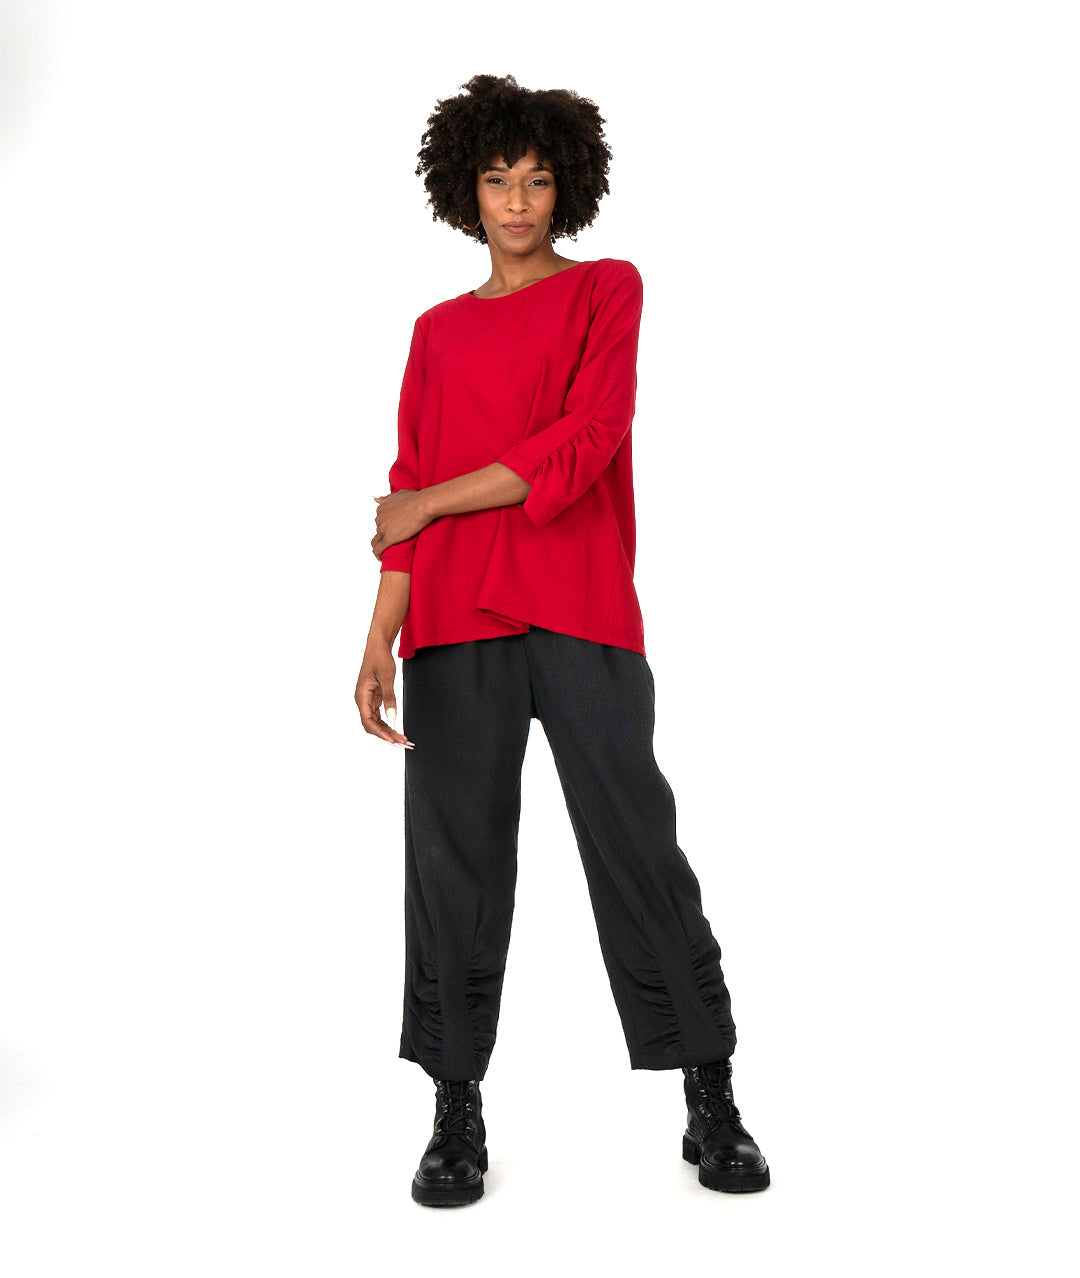 model in a red top with a rouching detail on the arms and a matching black pant with the same detail